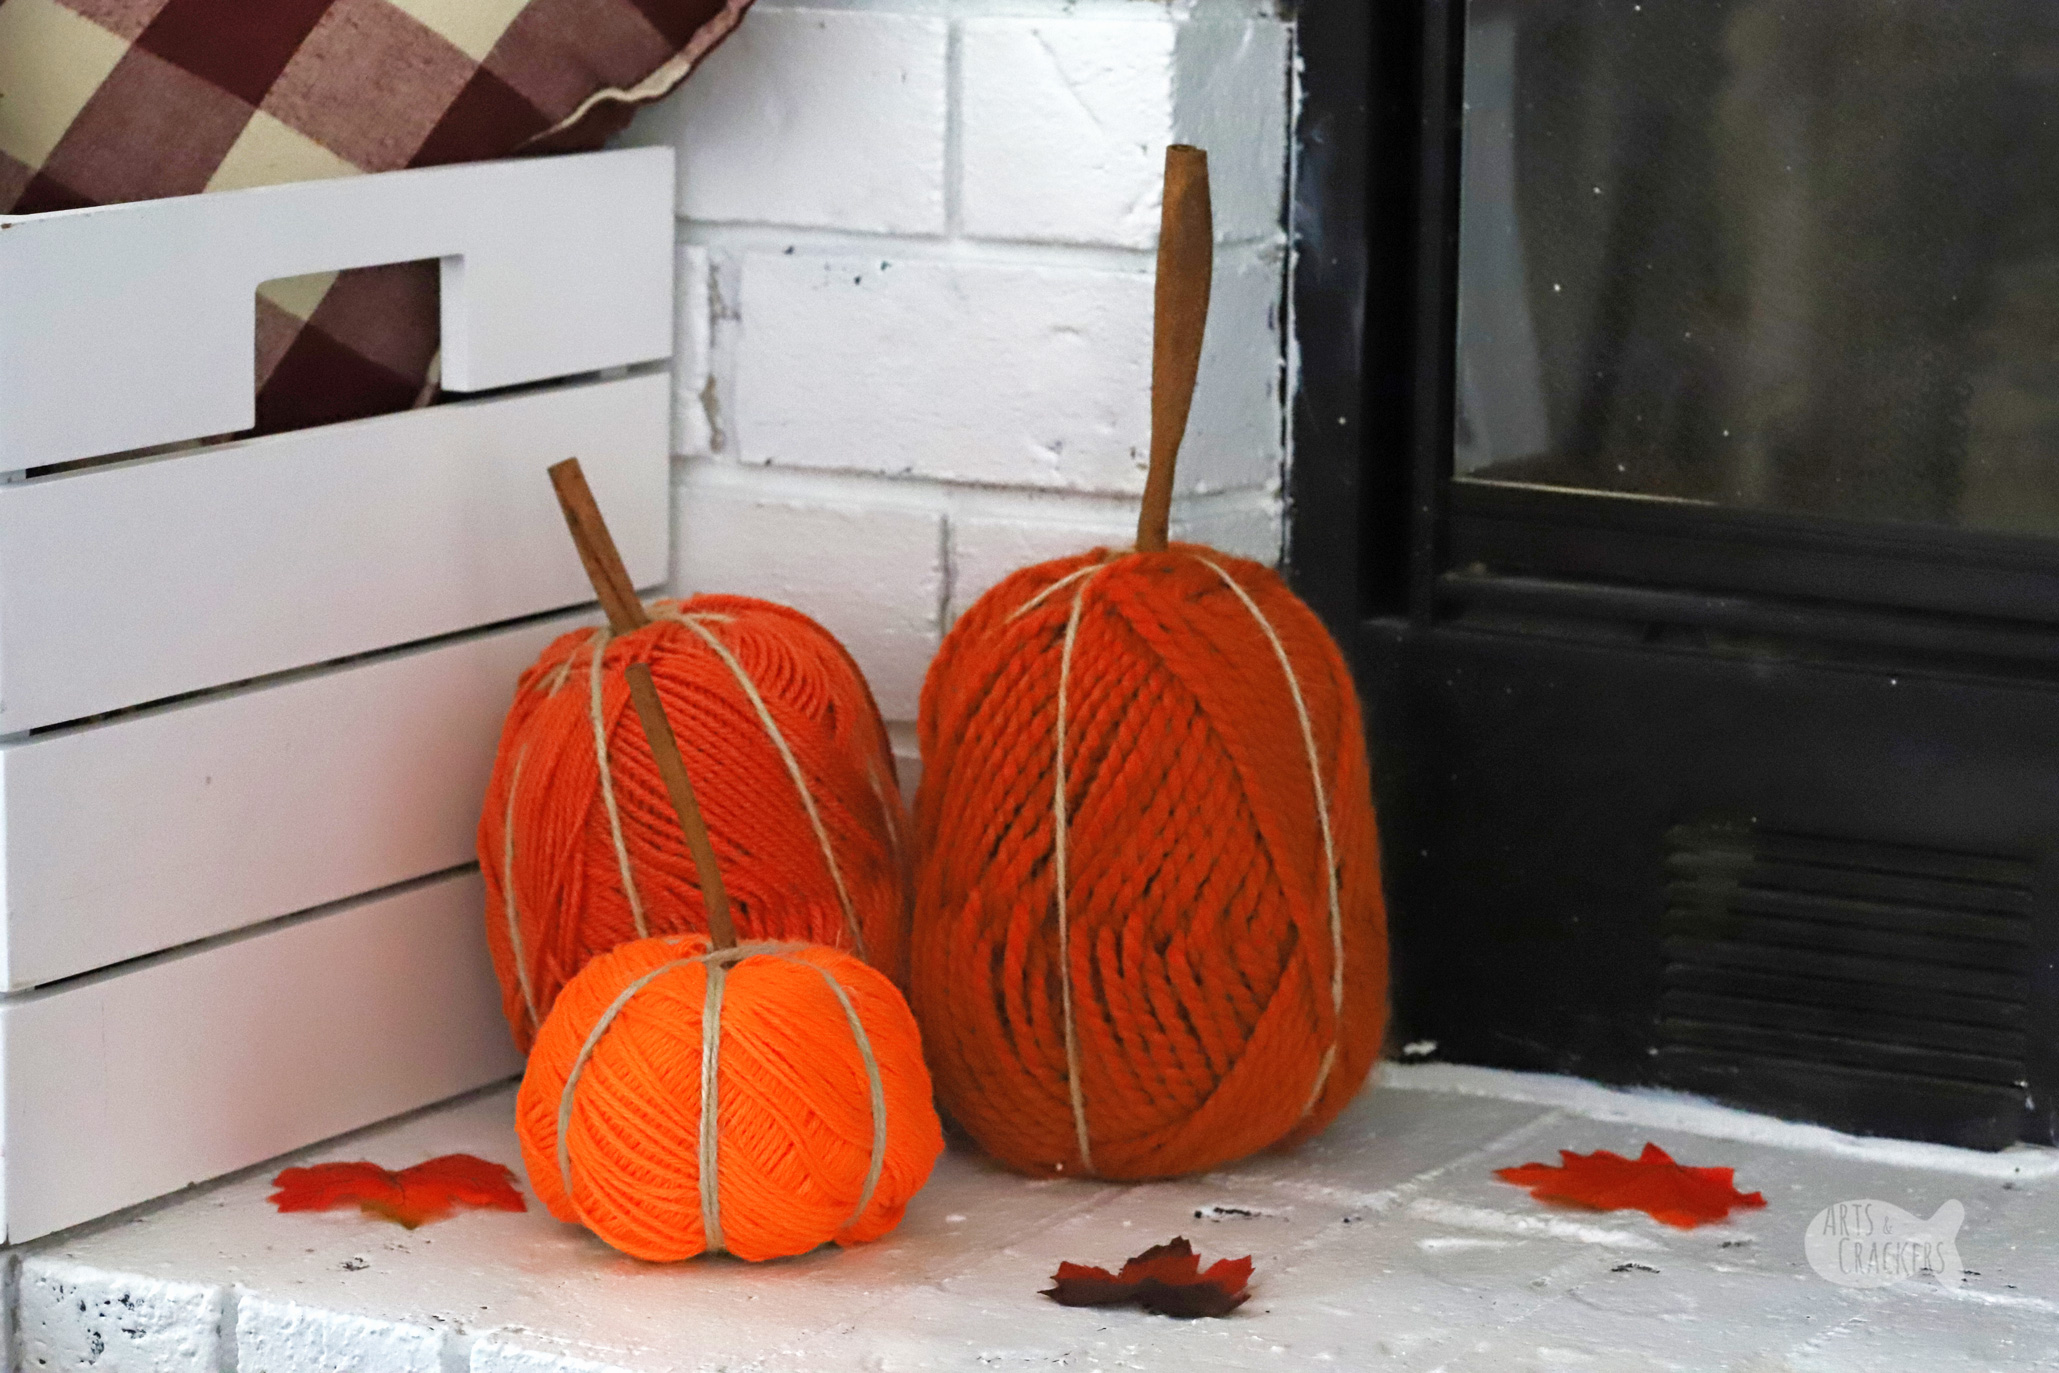 Decorate for fall with these adorable yarn pumpkins. Make this cute pumpkin decor with a yarn skein to make easy fall decorations for your home | DIY pumpkin decor | yarn skein crafts | fall crafts for the home | yarn pumpkins | no sew | yarn crafts for fall | fall home decorating | easy fall crafts | fall mantel | #yarncrafts #craftyfingers #autumncrafts #homedecor #pumpkins #yarn #DIYblogger